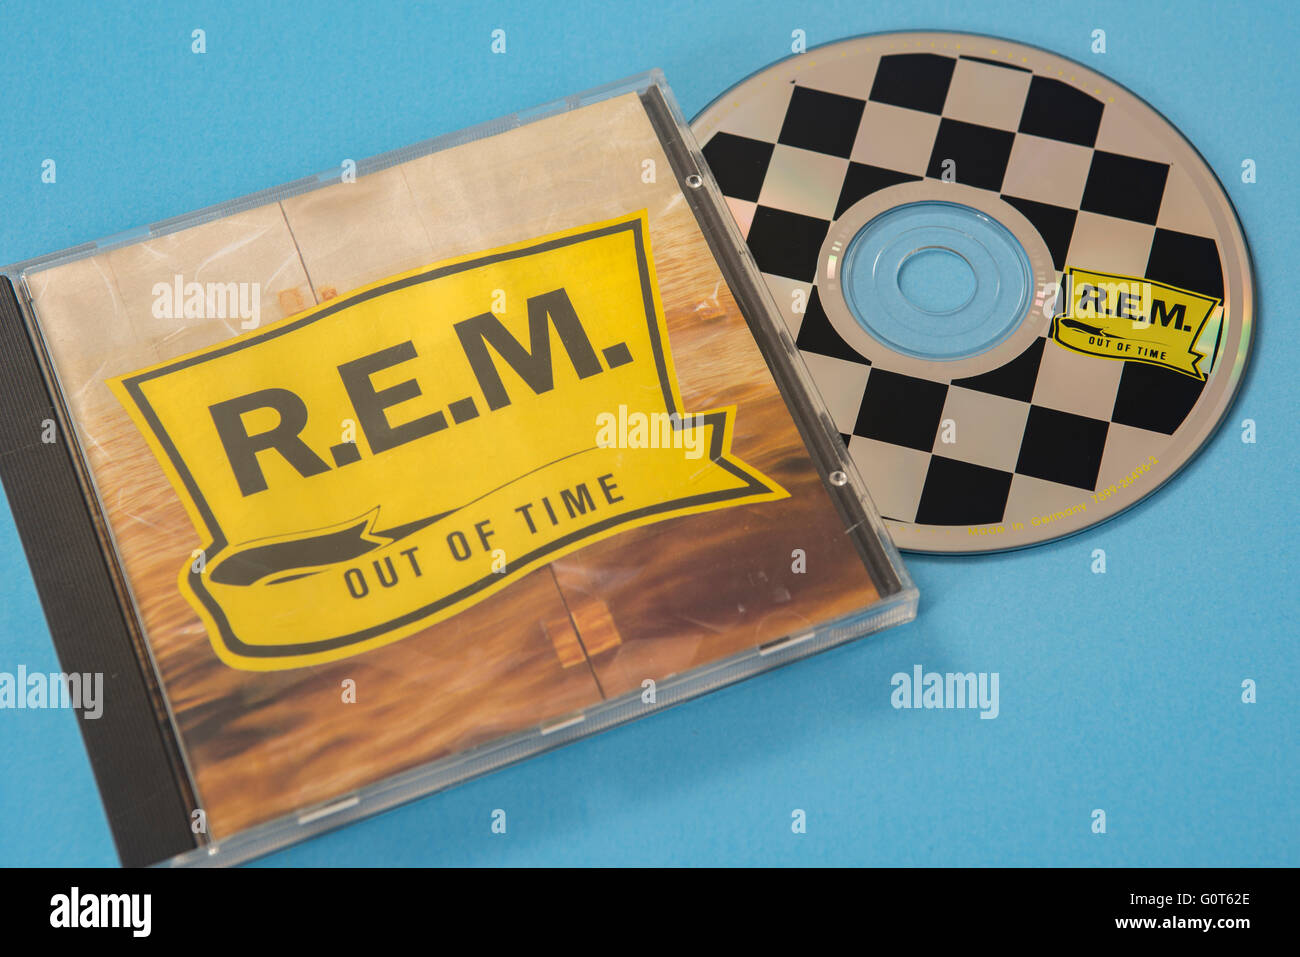 Out of Time (R.E.M.).